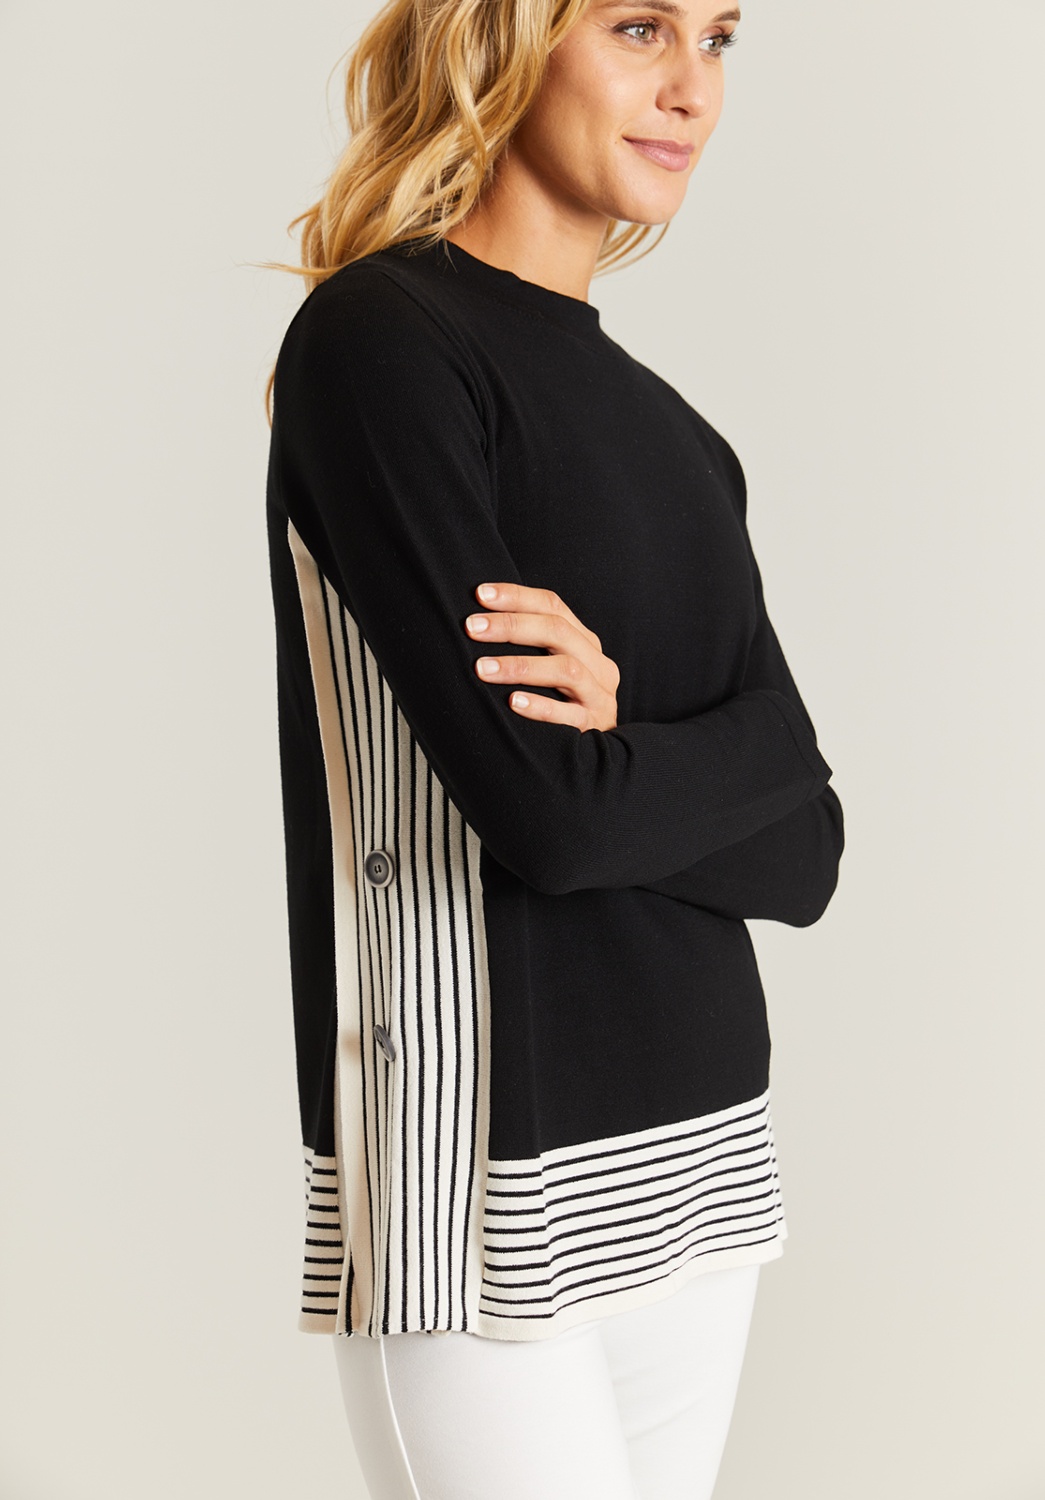 Black Sweater With Stripes